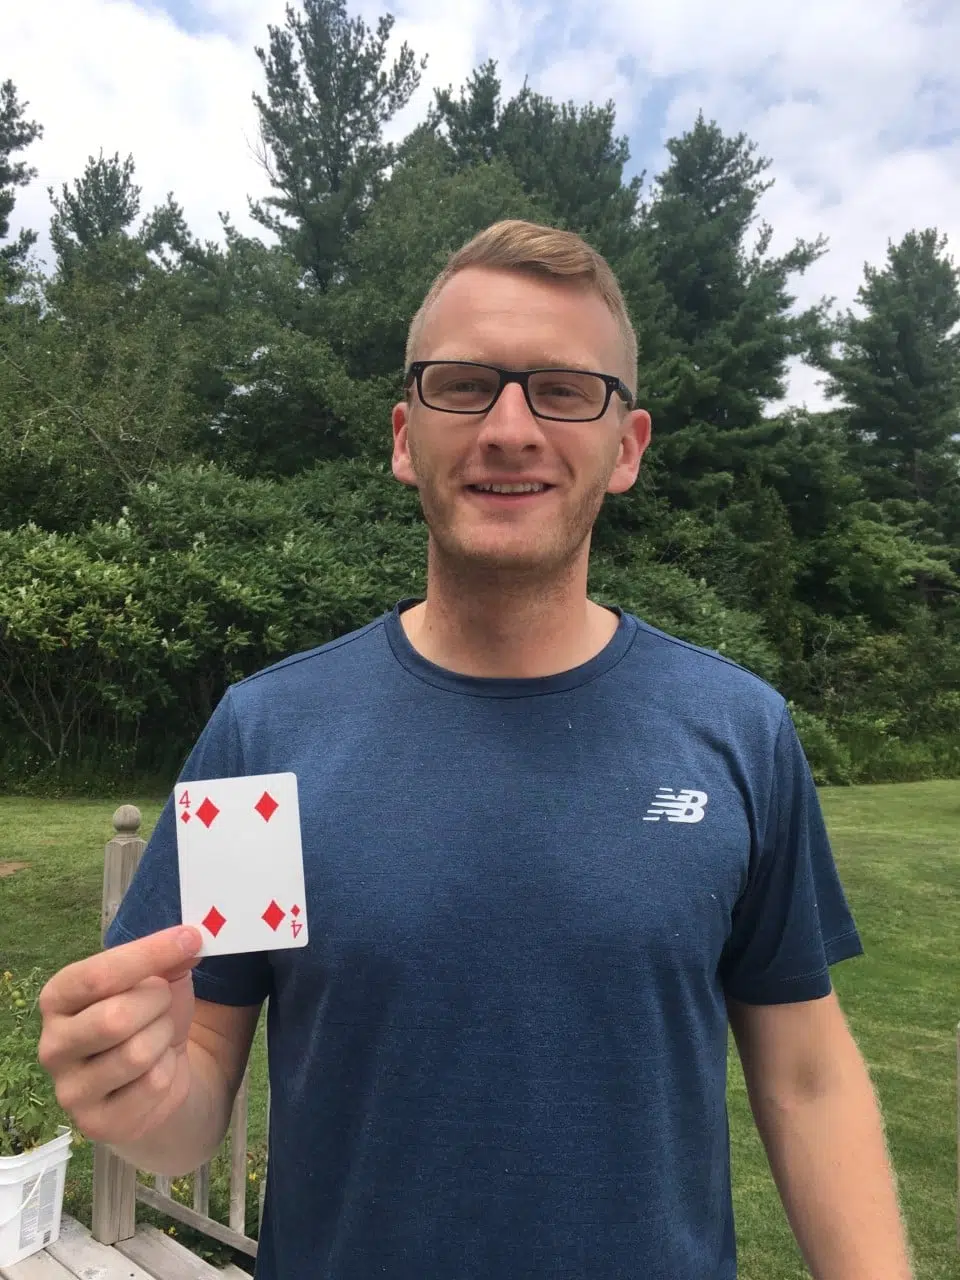 Community Spotlight: Resident wins hundreds in Catch the Ace, planned to buy beer and more tickets